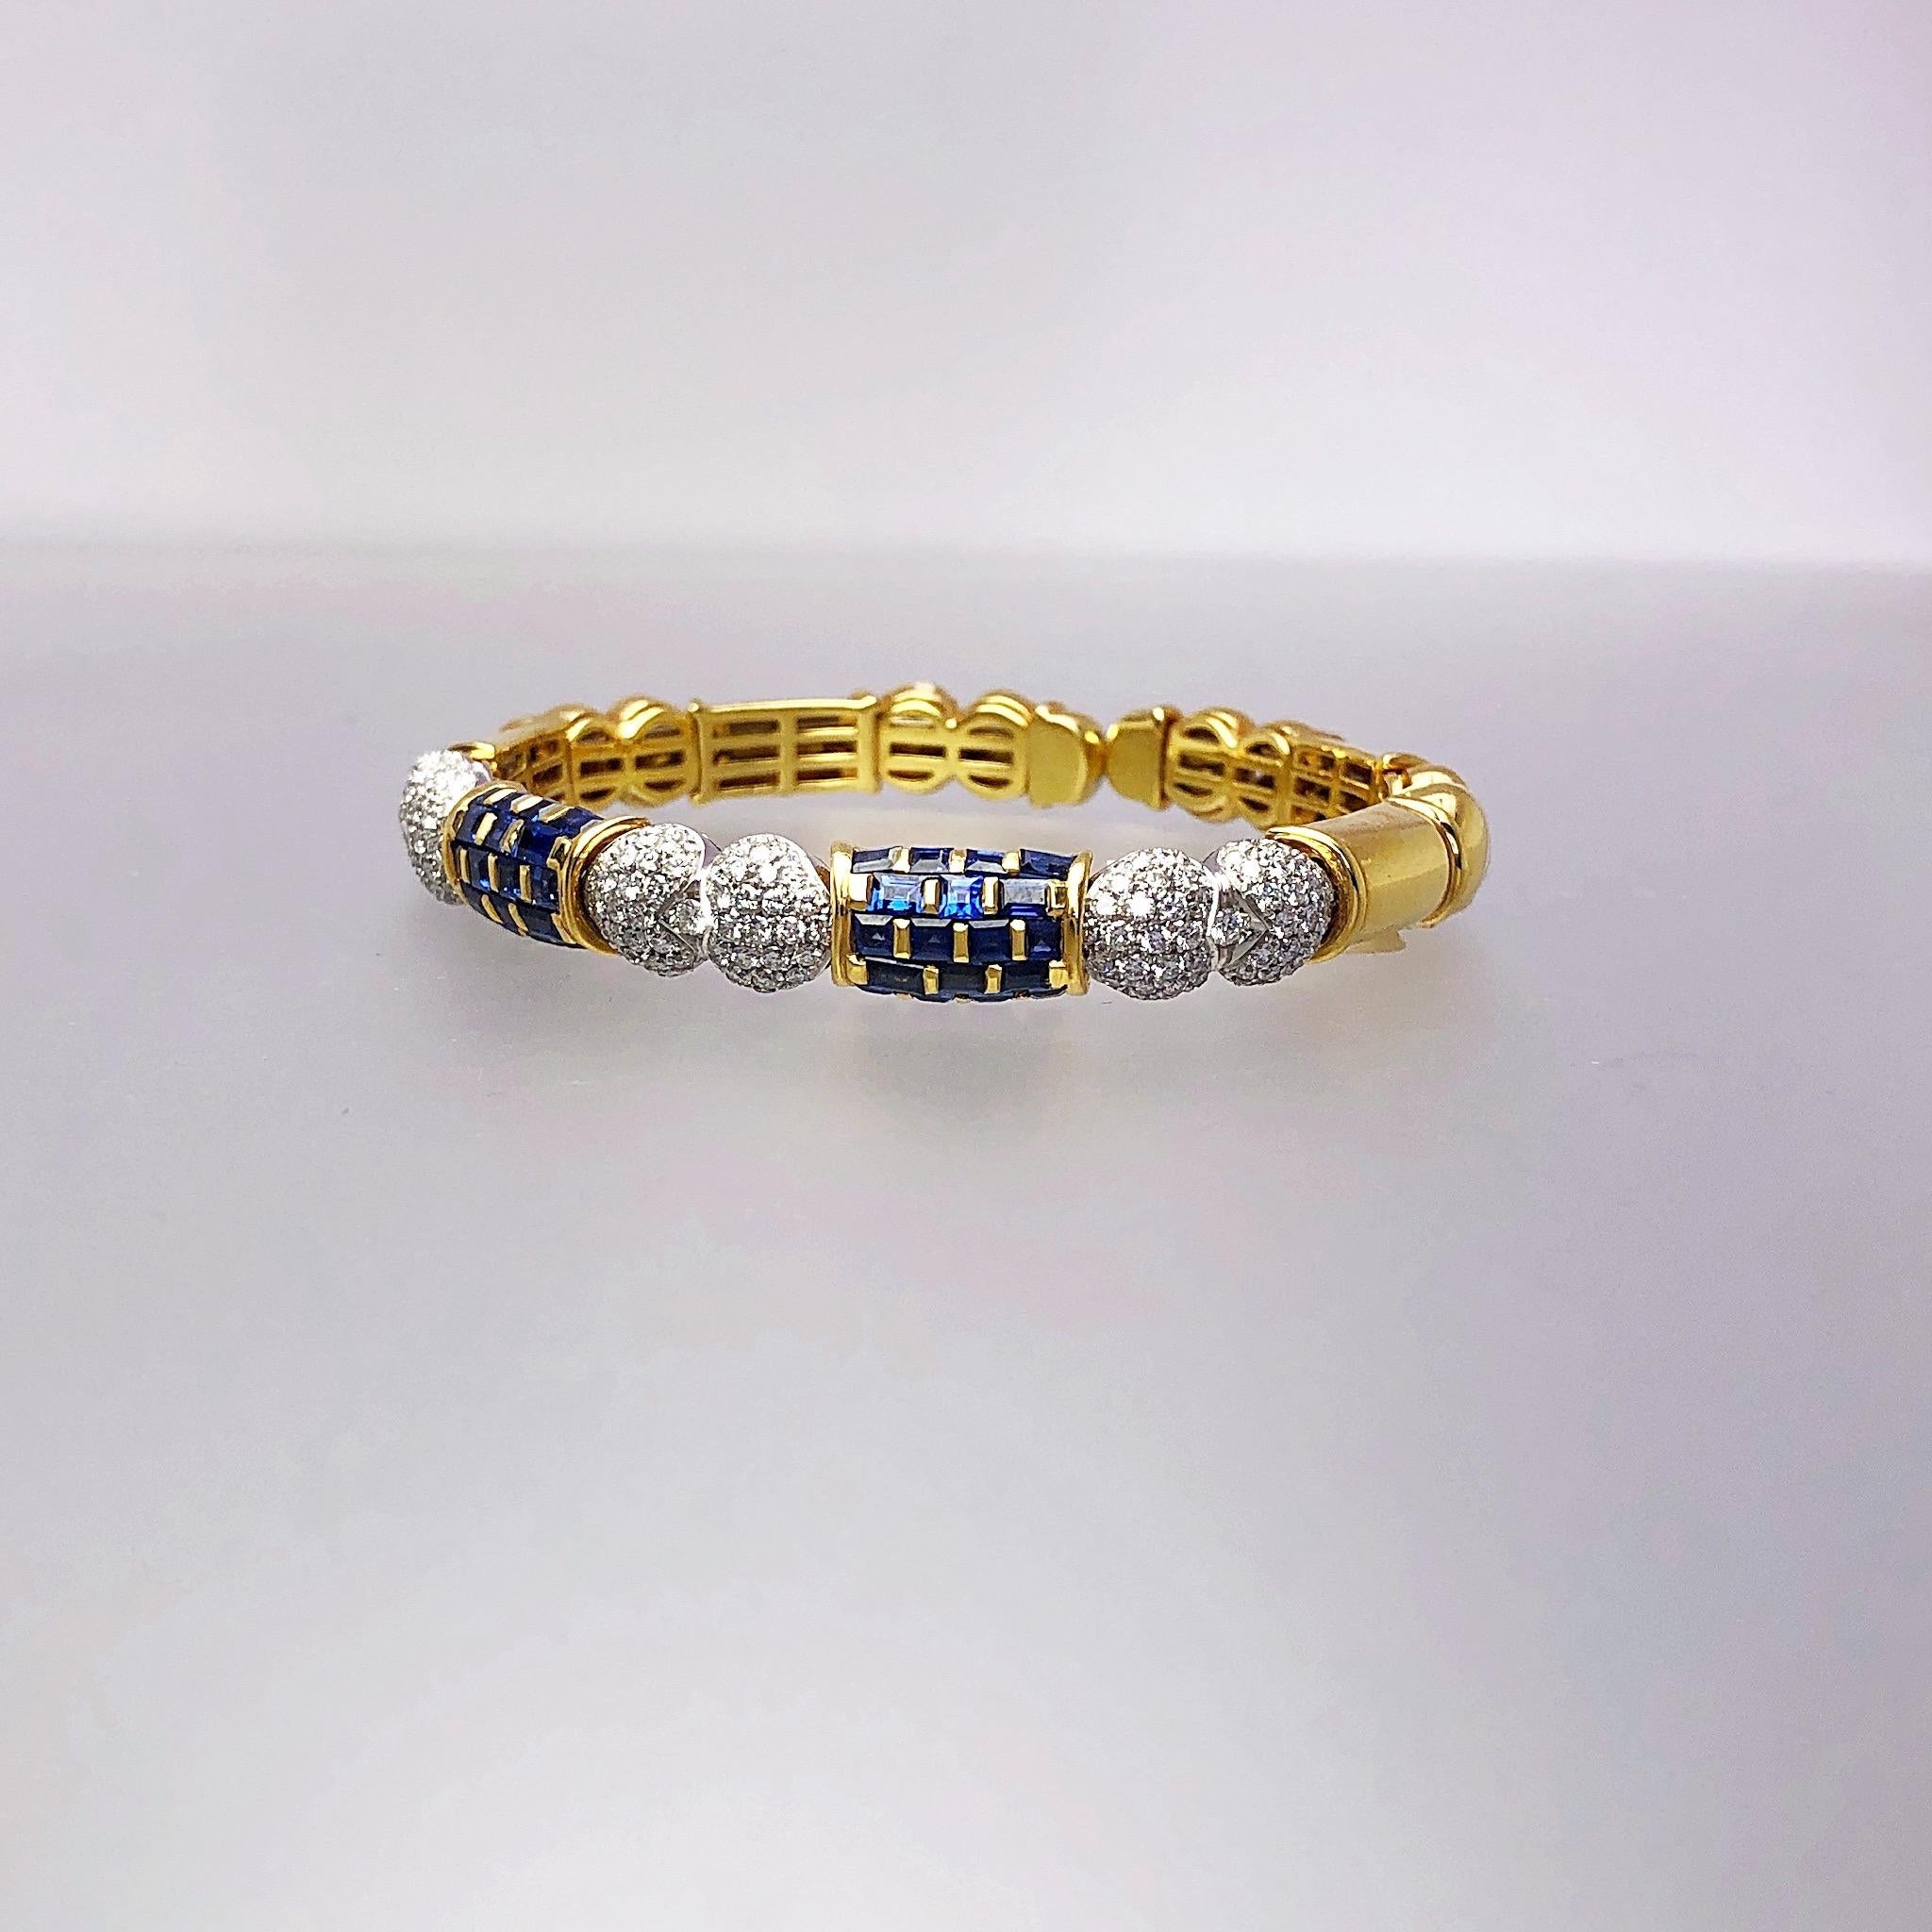 Founded in 1969 in Valenza, Italy RCM is well known for their classic designs in modern appeal.
This bracelet is a perfect example of their unique styling.
The 18 karat yellow gold flexible bracelet is designed with 2 sections which have been